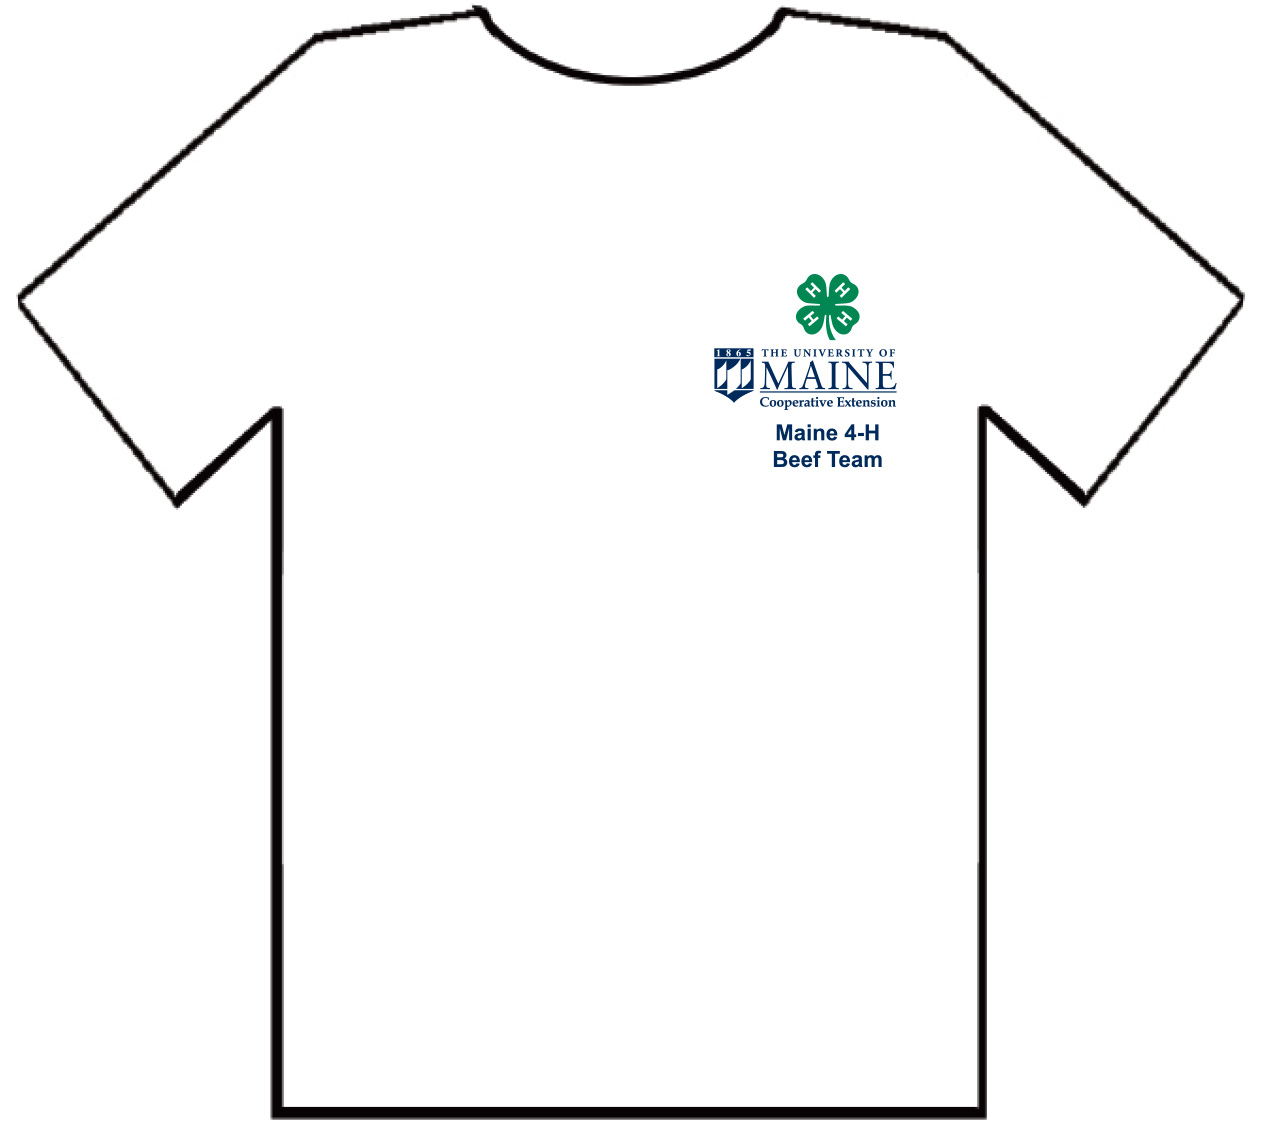 T-shirt Designs | Plugged In: For UMaine Extension Staff ...